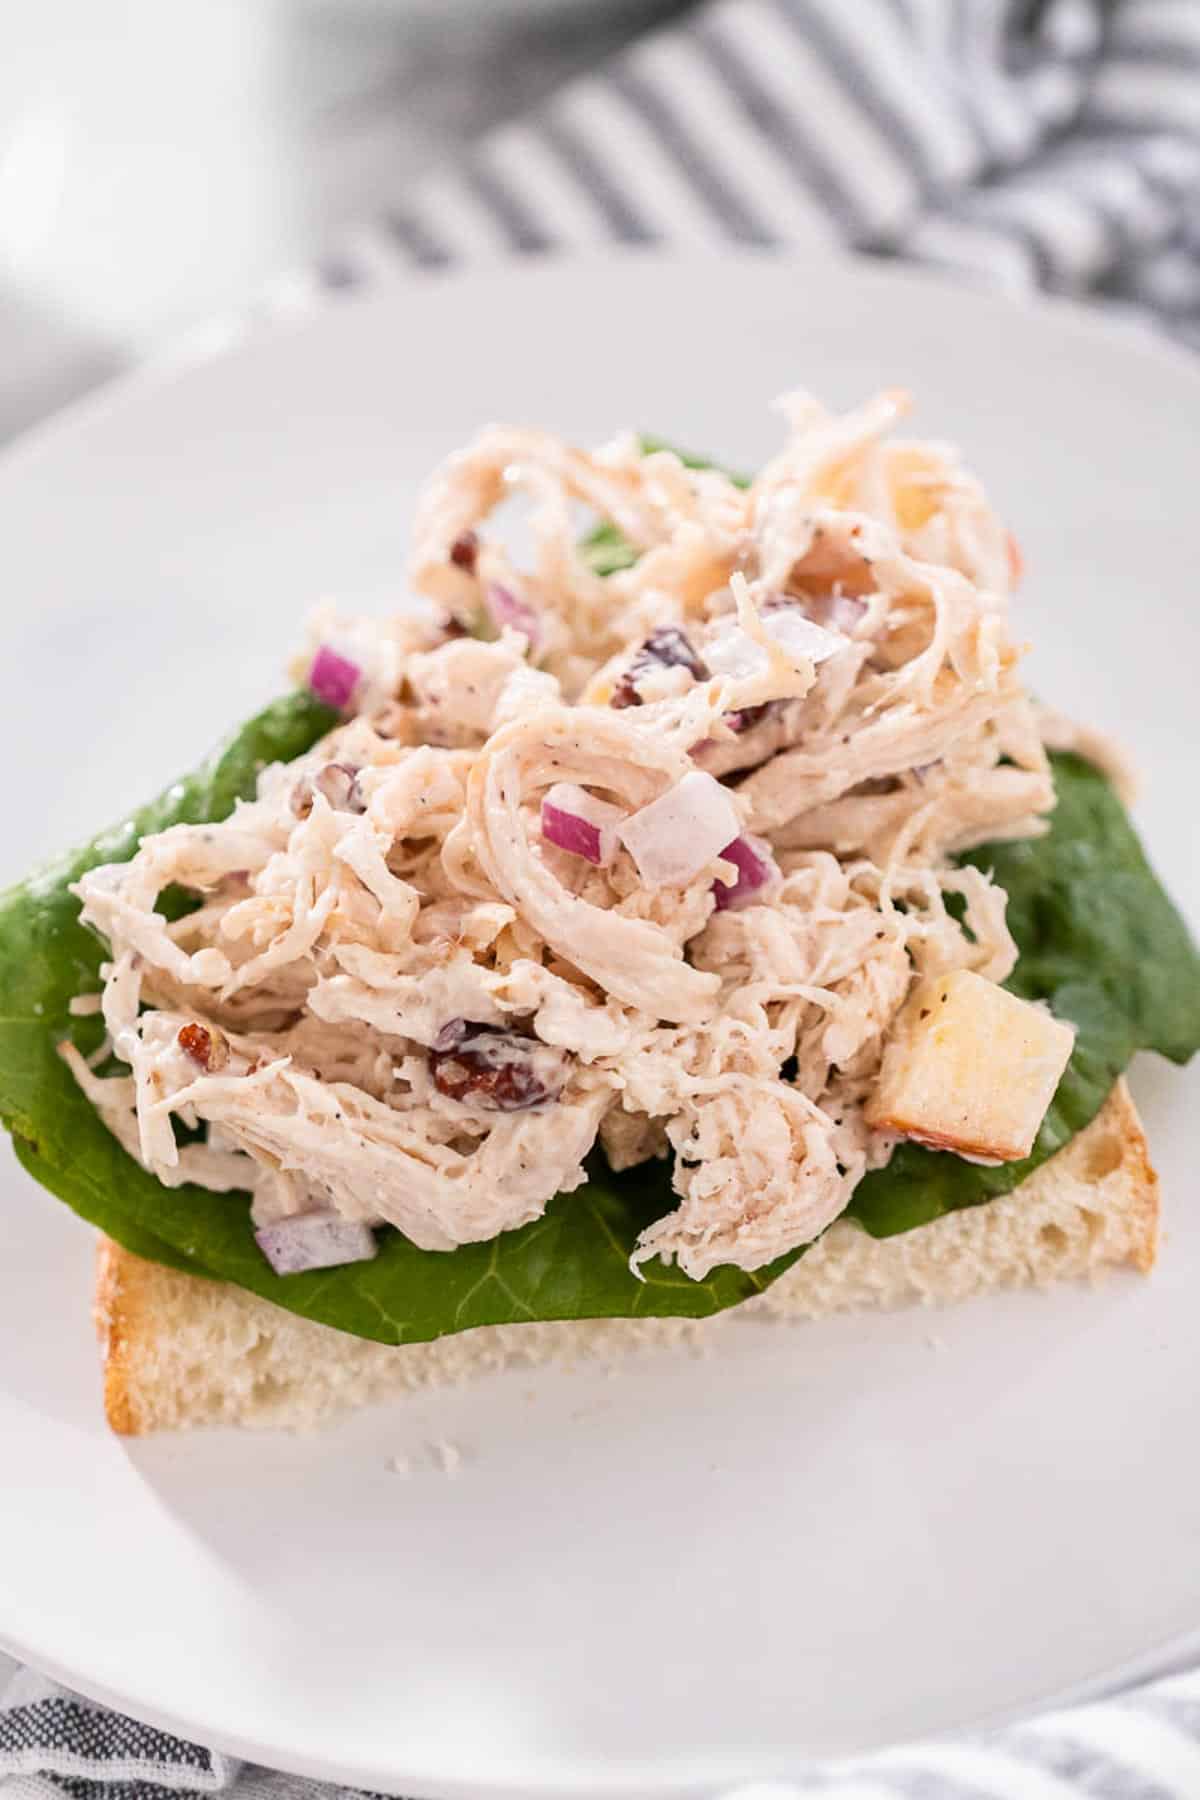 A half sandwich of Apple pecan chicken salad on white bread and lettuce.